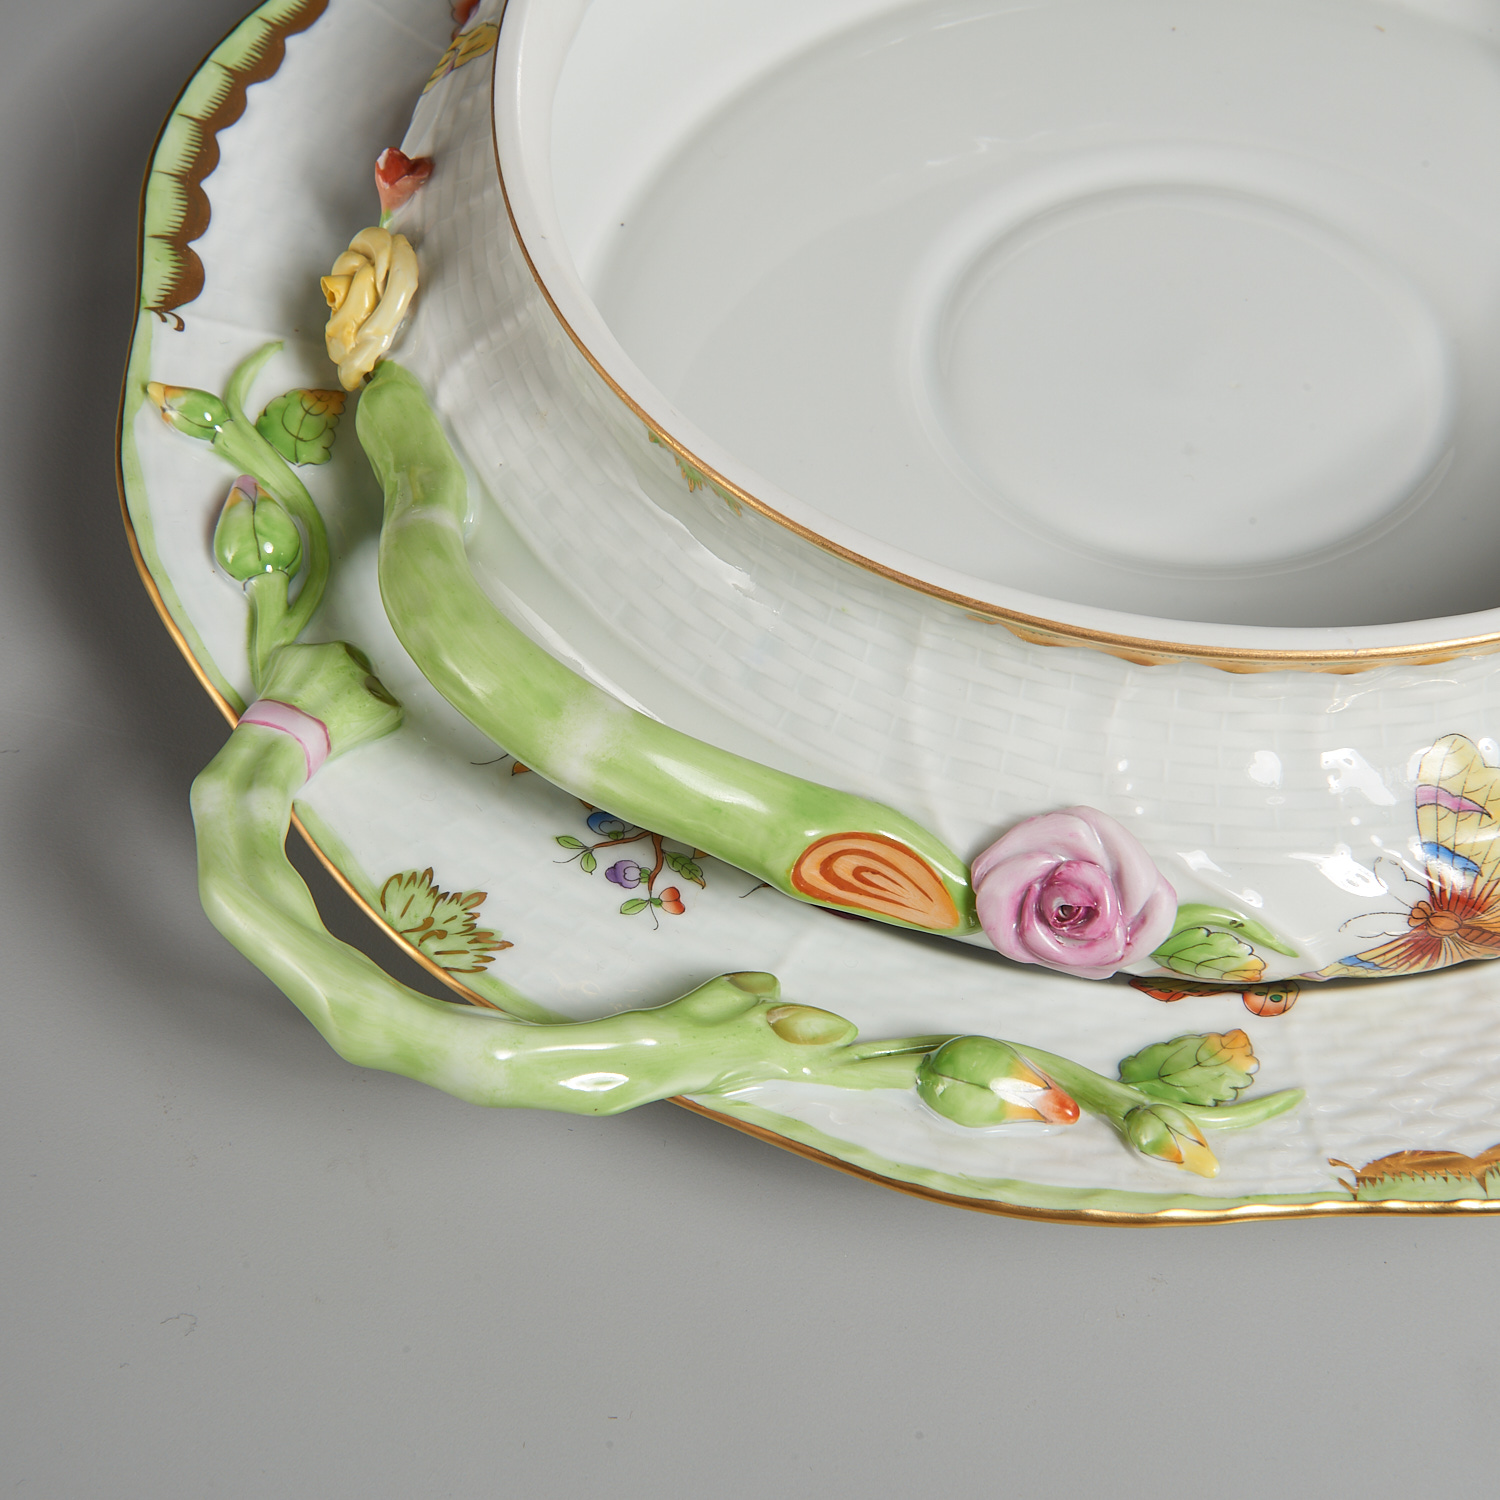 Herend Porcelain Tureen and Platter - Image 4 of 7